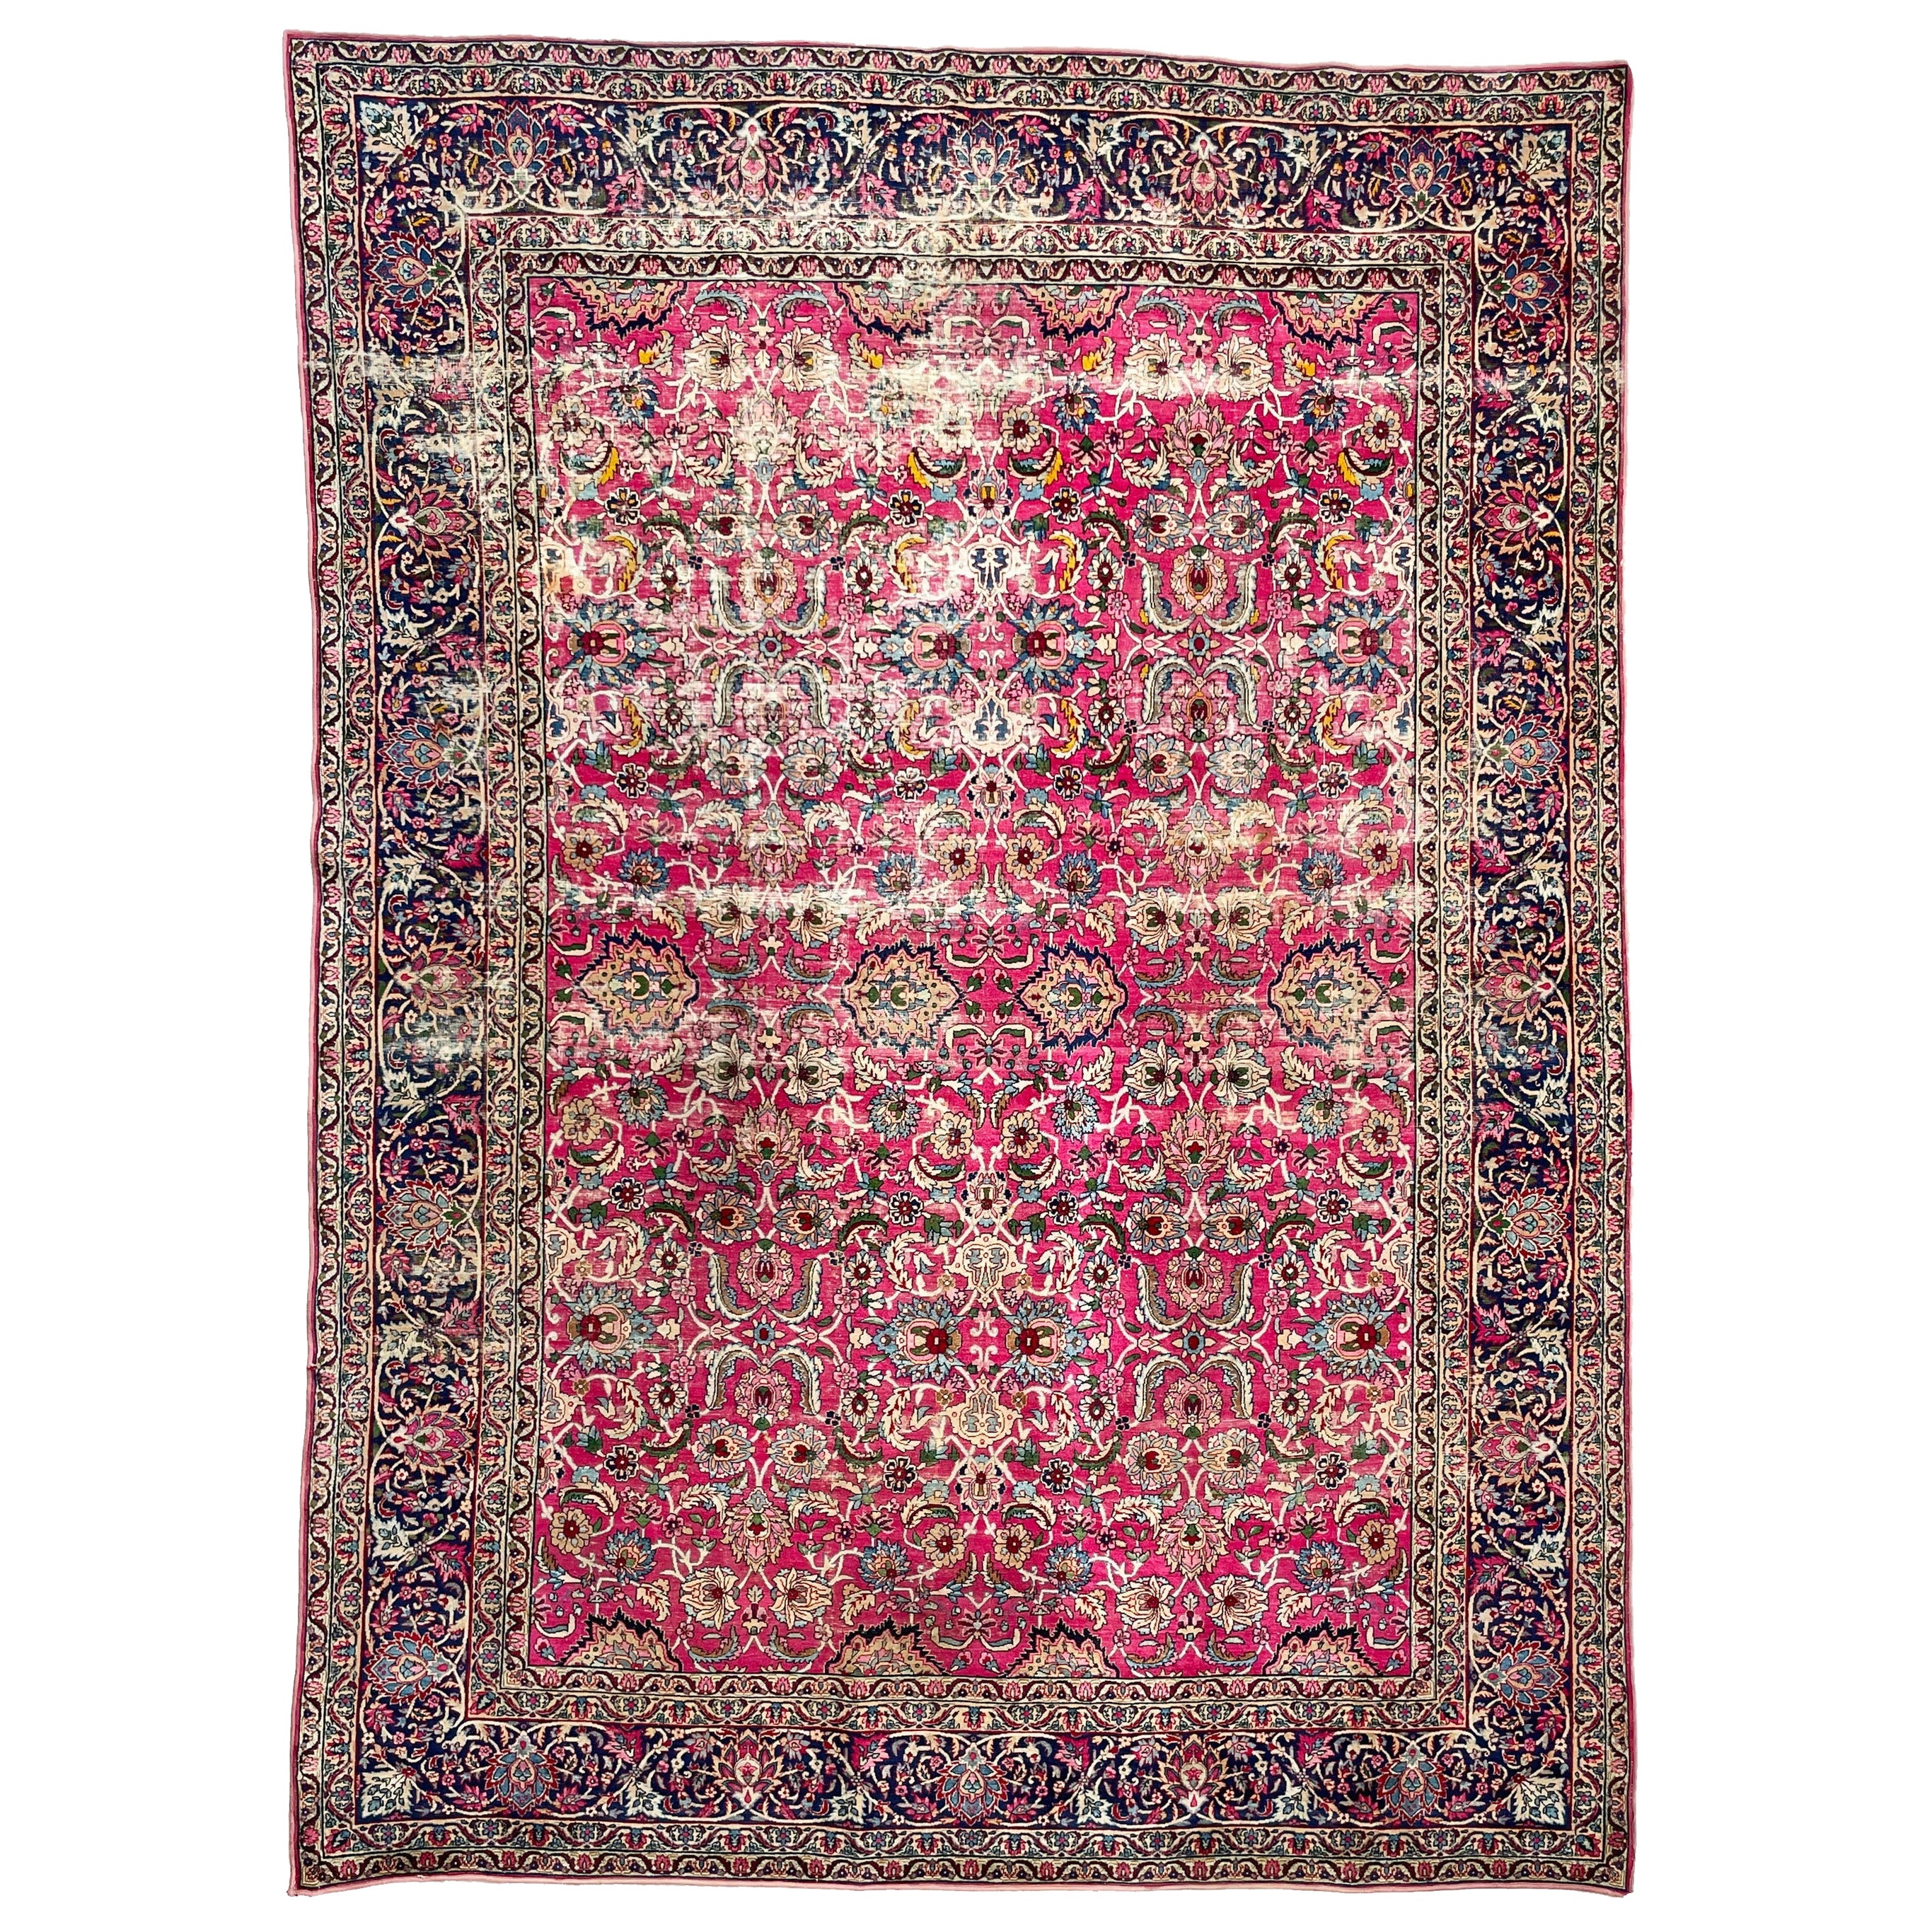 Antique Botanical Beauty Rug with Magenta, Green, Ice Blue Color, circa 1930's